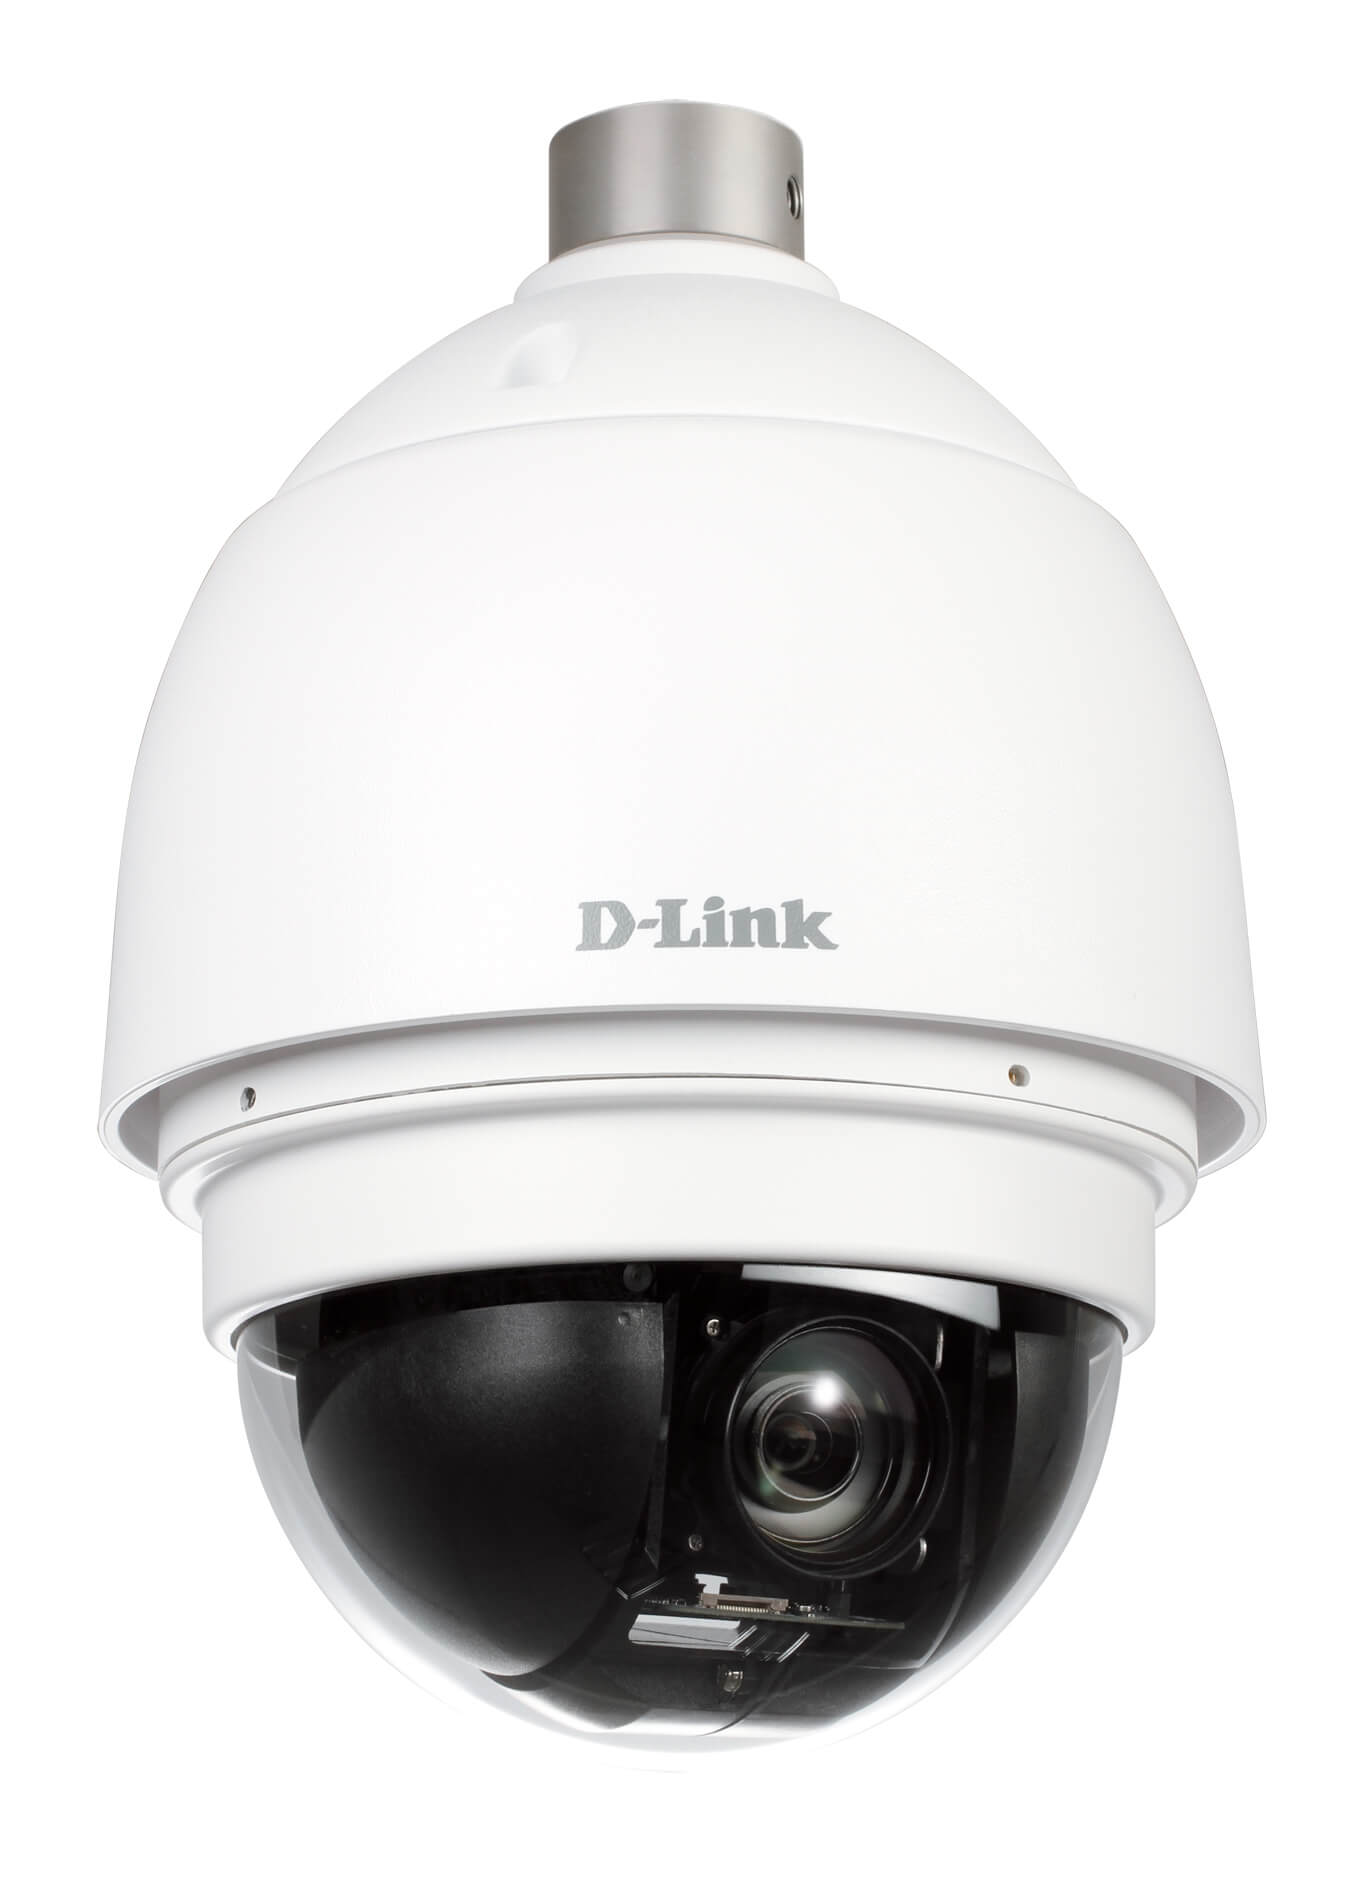 OUTDOOR IP CAM 3MP, SONY EXMOR LENS HIGH SPEED PTZ DOME, WDR, OPTICAL X20 ZOOM ,1080P 30FPS, IP66